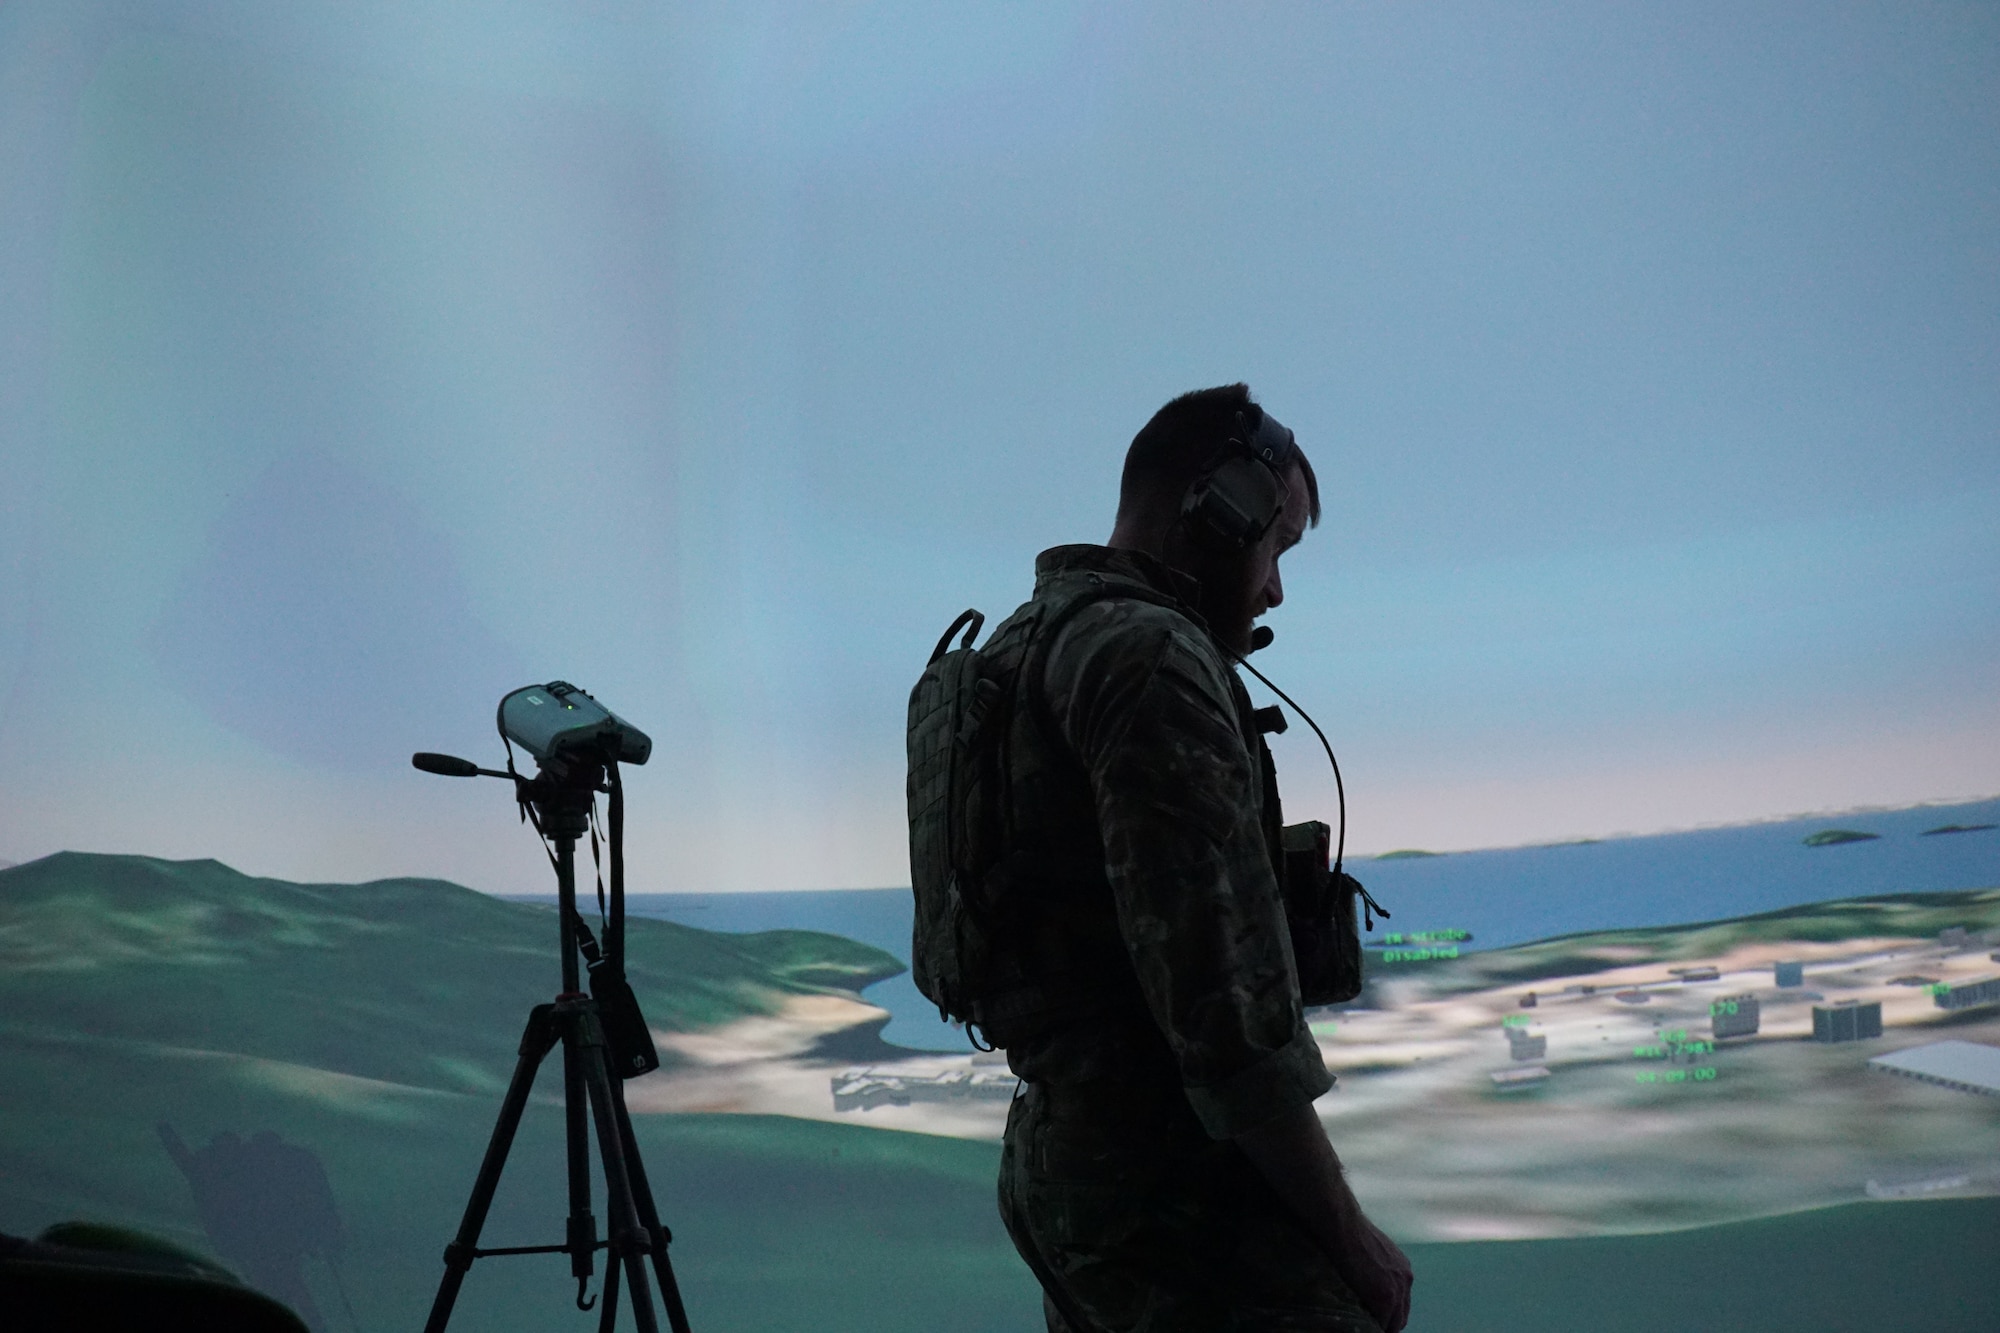 a uniformed Royal Air Force member stands next to binoculars that are mounted on a tripod while working in a virtual simulated environment